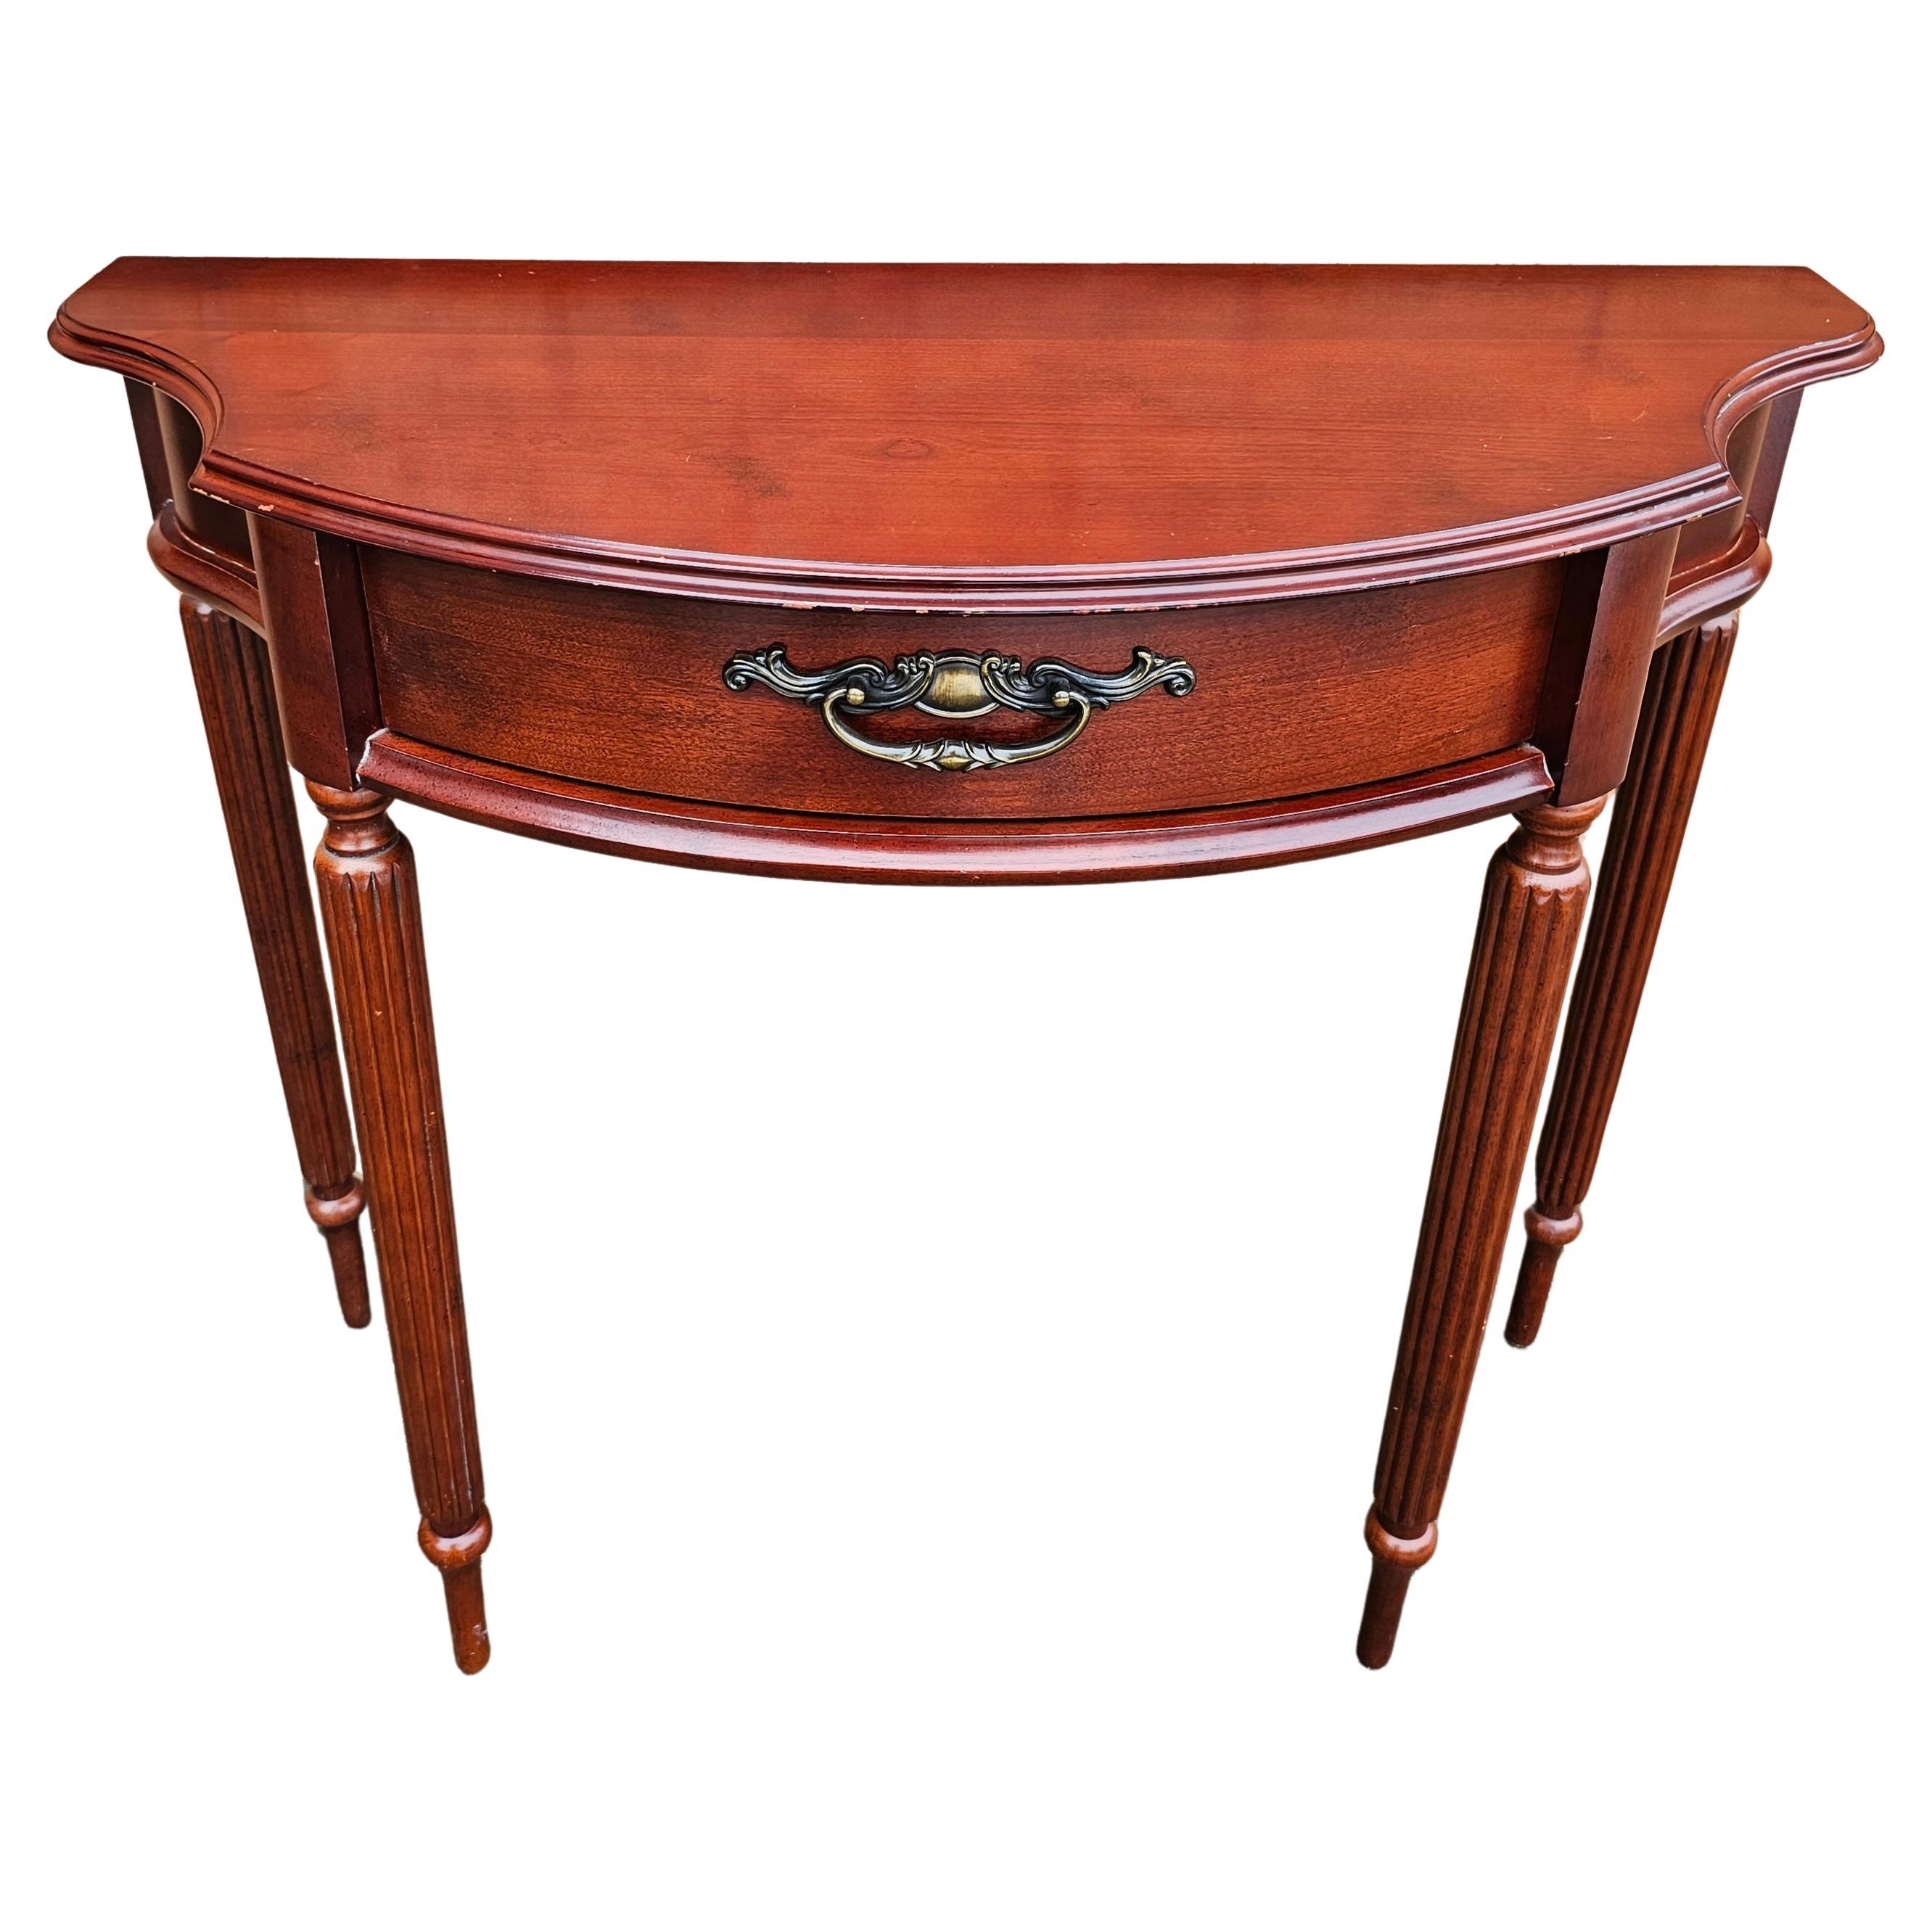 A Late 20th Century Bombay Furniture Federal Style Mahogany Console Table in very good vintage condition.
Measures 35